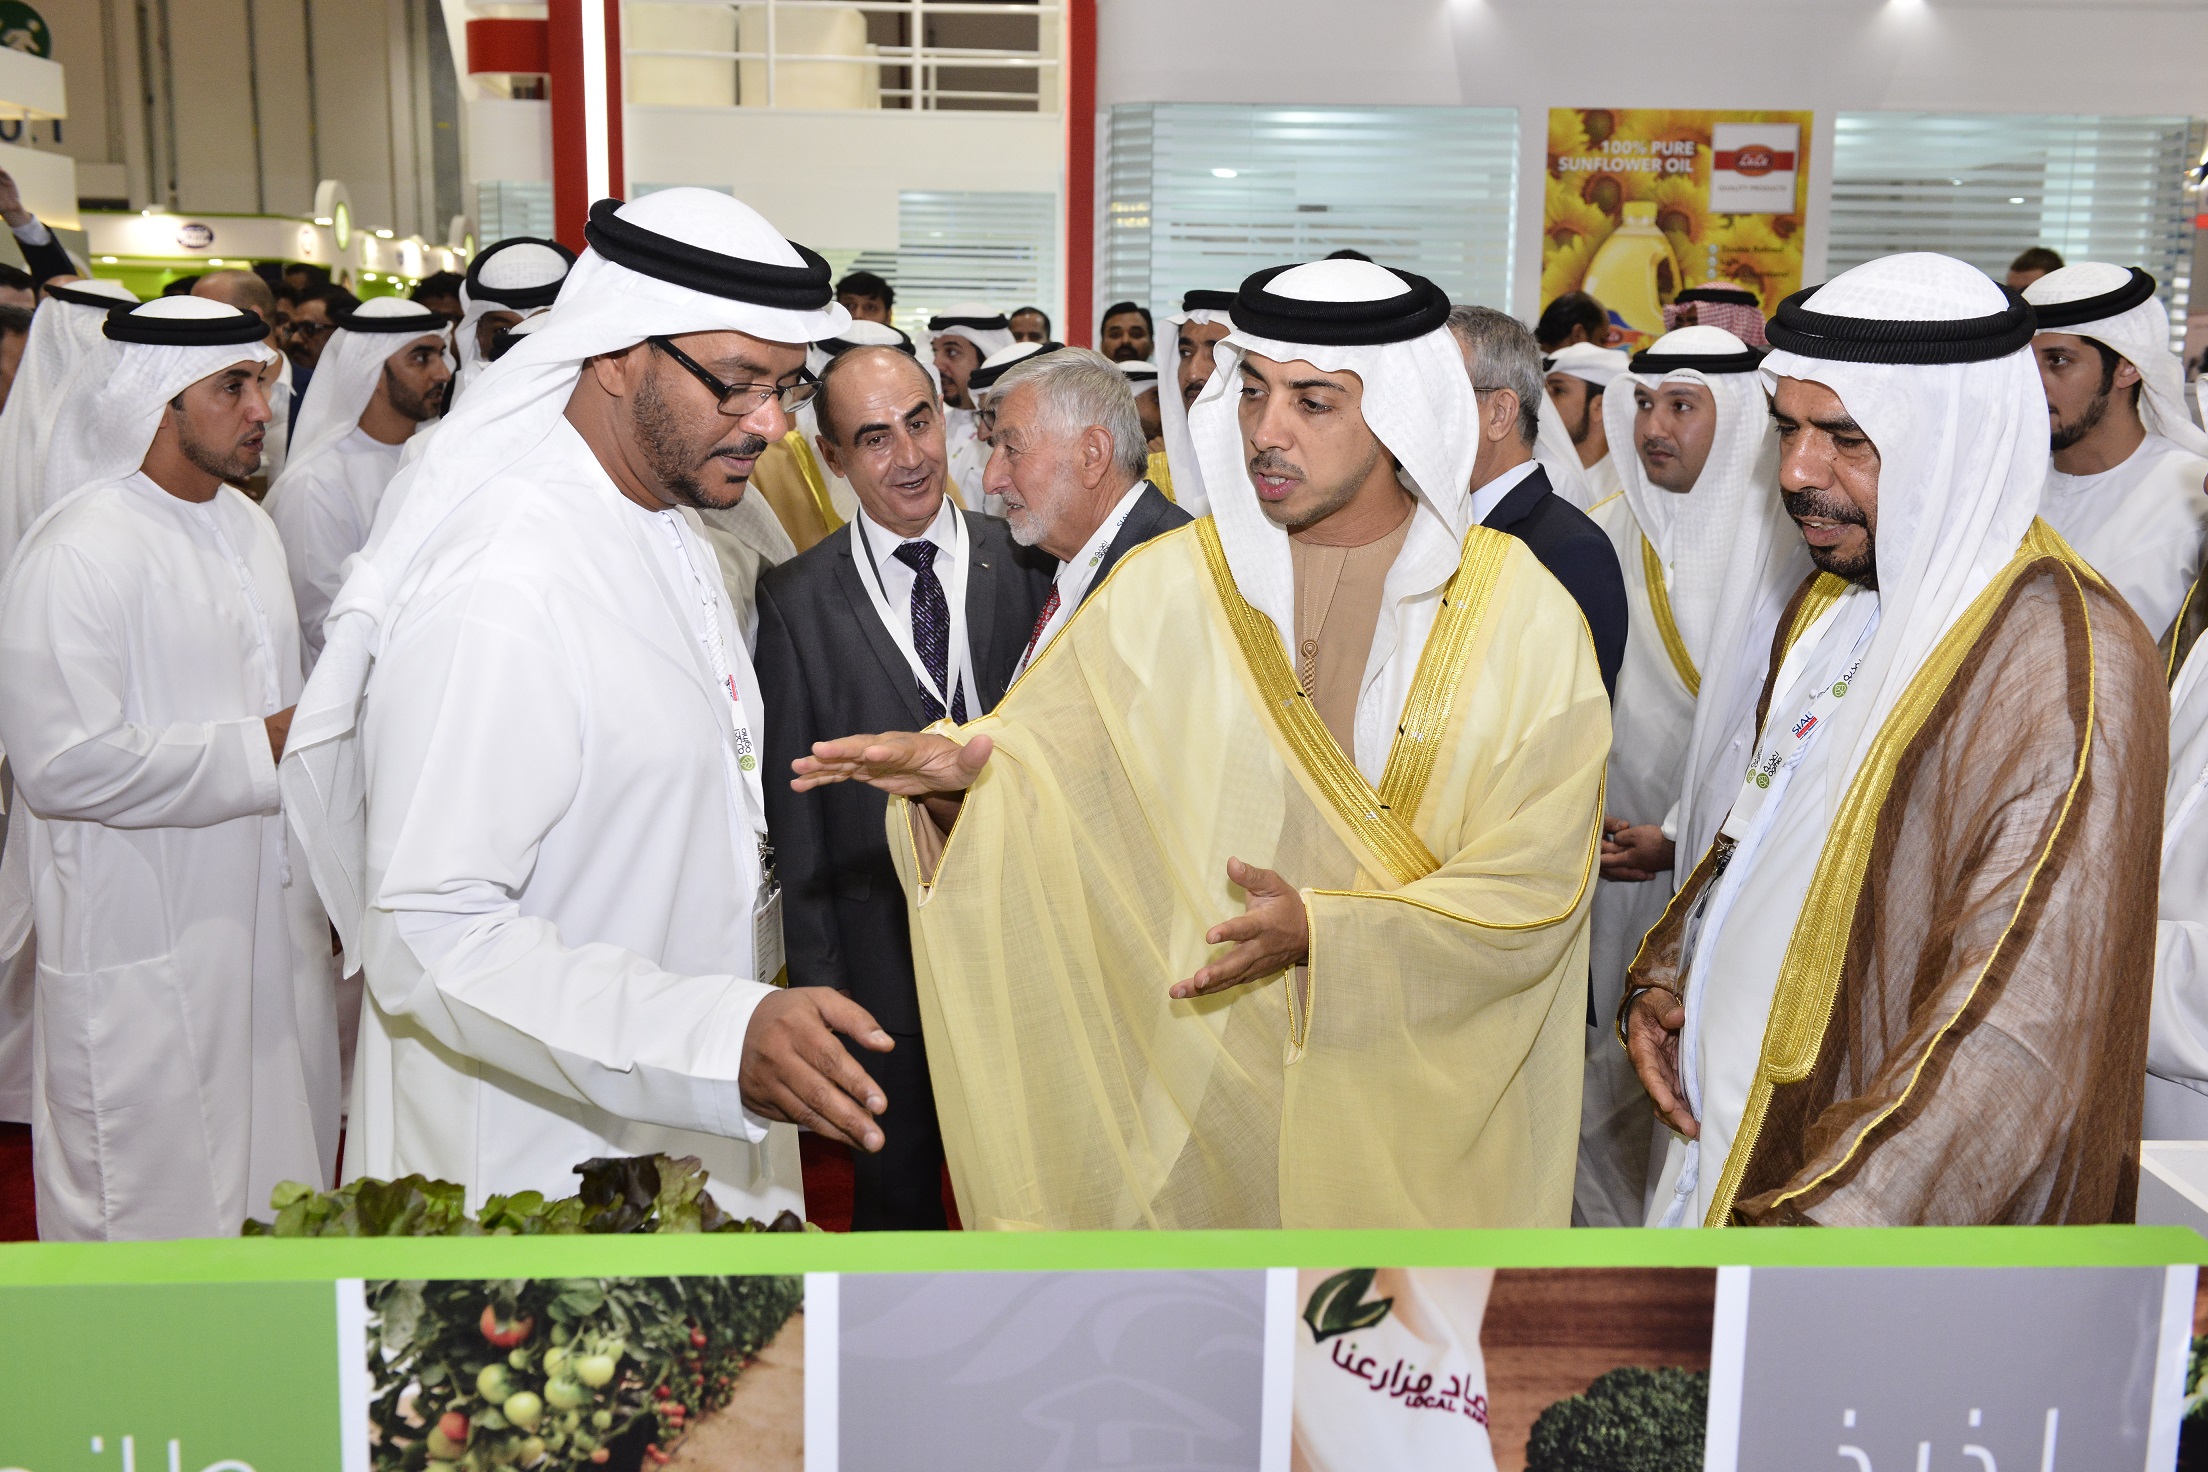 Abu Dhabi Farmers’ Services Centre (ADFSC) – through its retail brand Local Harvest - is using the international food industry event SIAL ME 2015 – being held December 7-9 in Abu Dhabi National Exhibition Centre, UAE – as a platform to reassure purchasers and other industry players about the quality and safety of ADFSC’s plant and animal products.